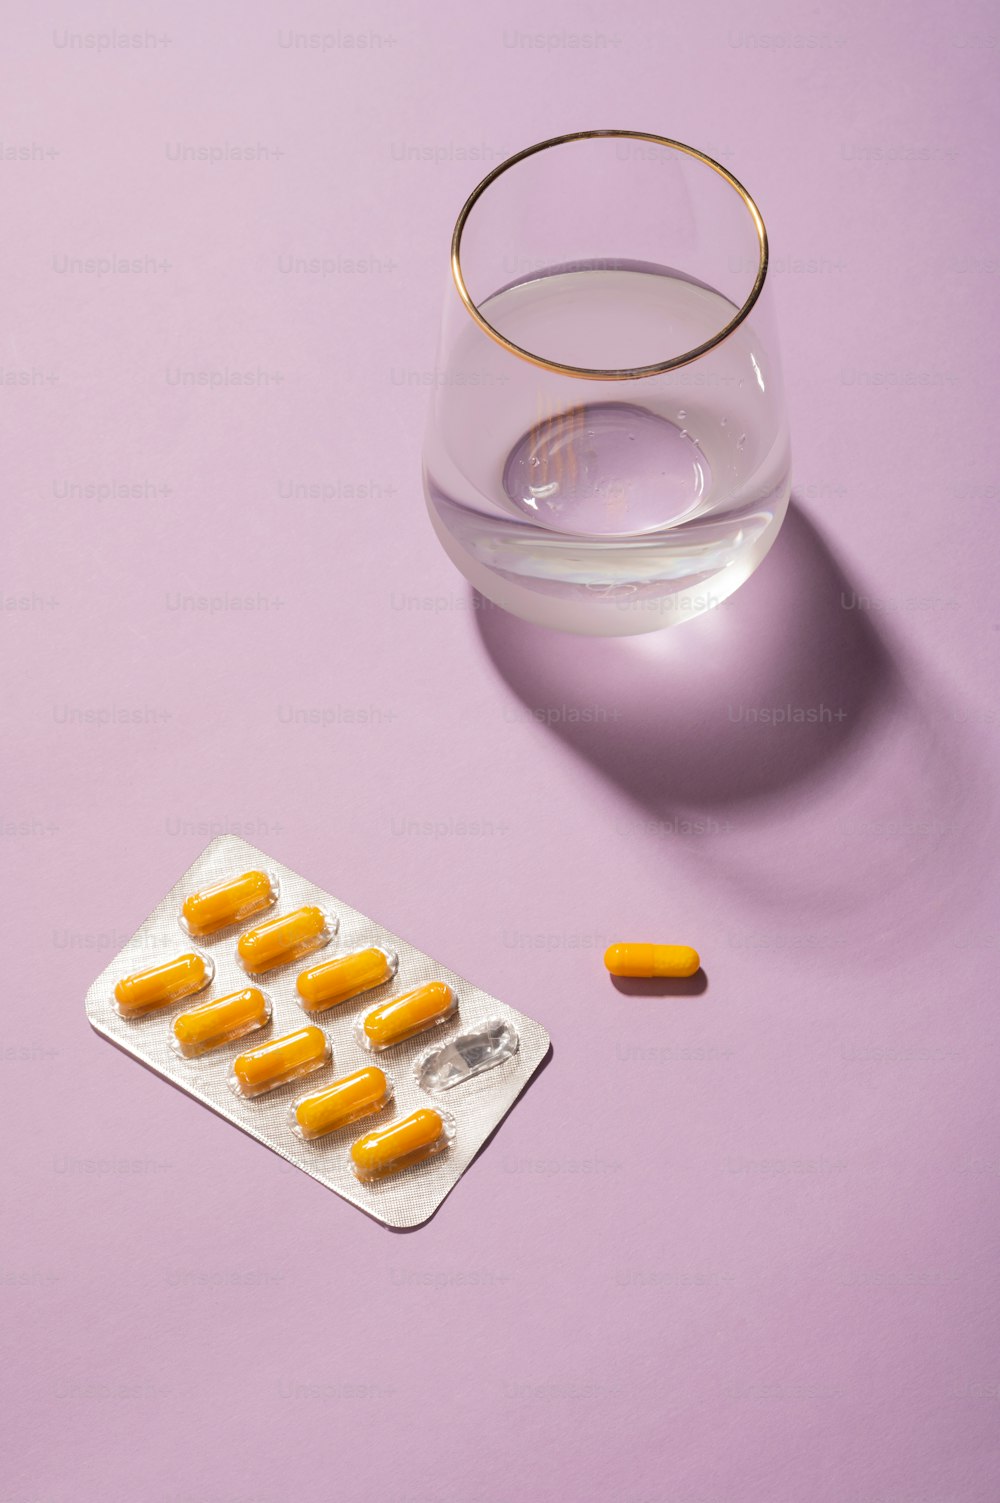 pills and a glass of water on a purple surface